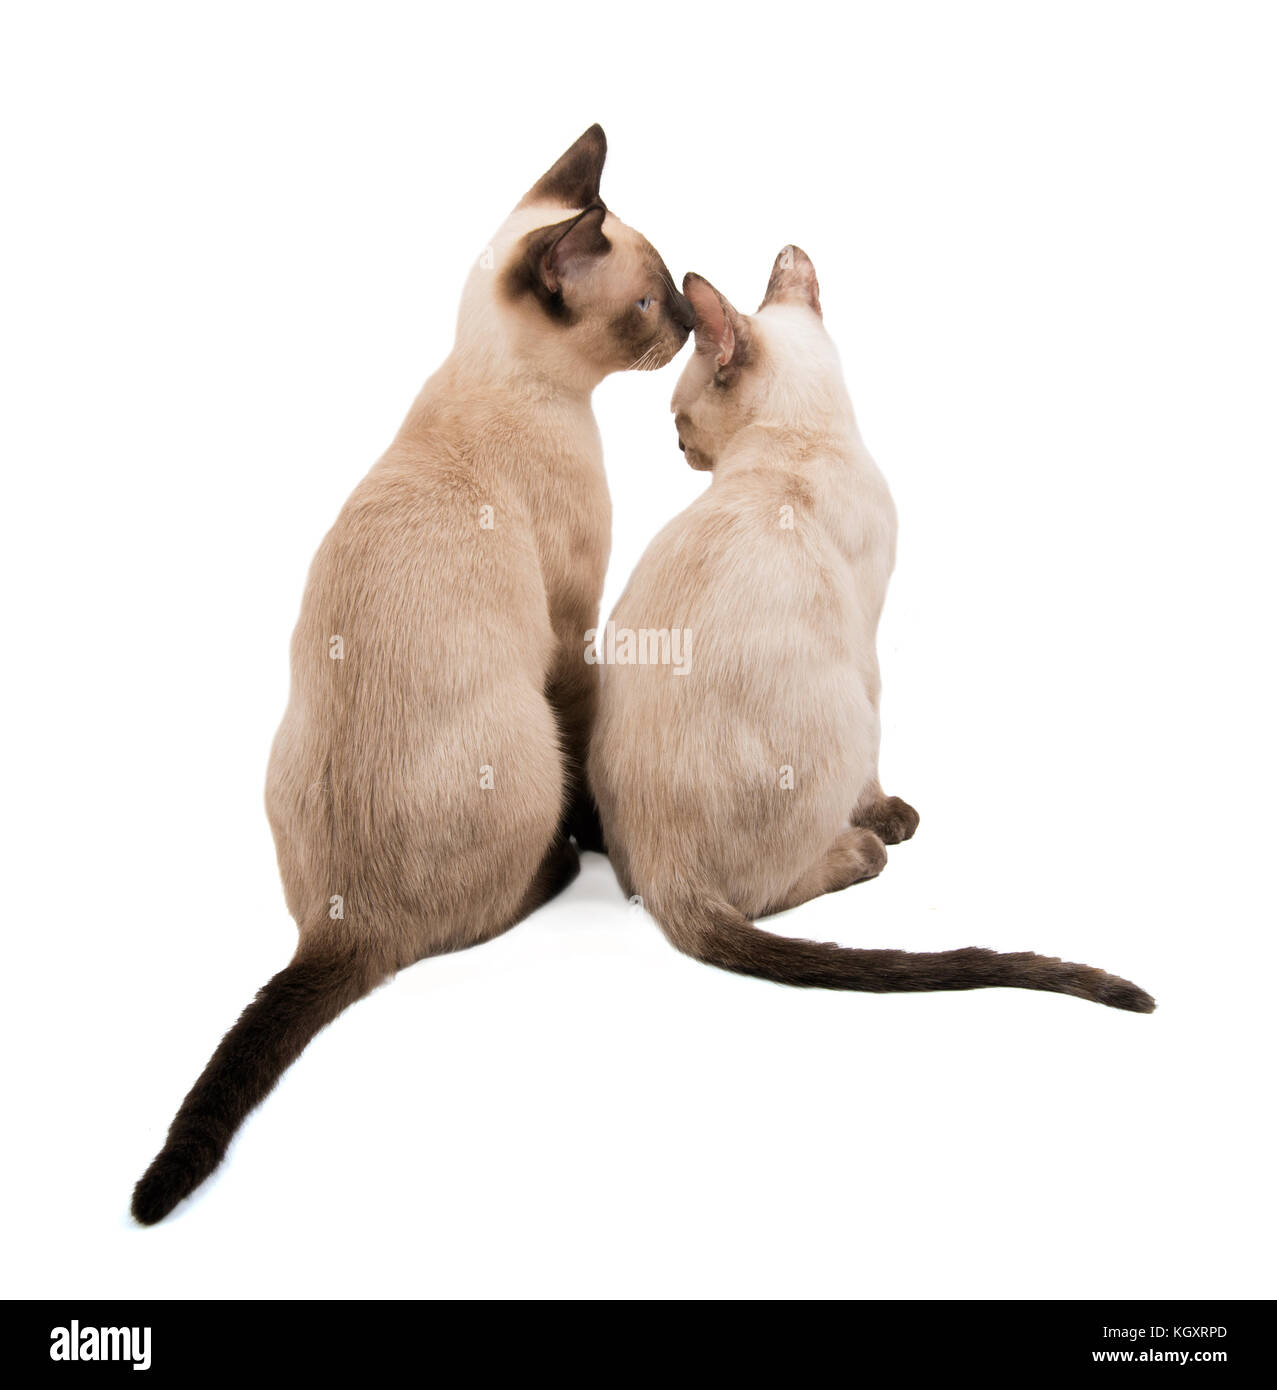 Two young Siamese cats sitting next to each other, showing affection, on white Stock Photo